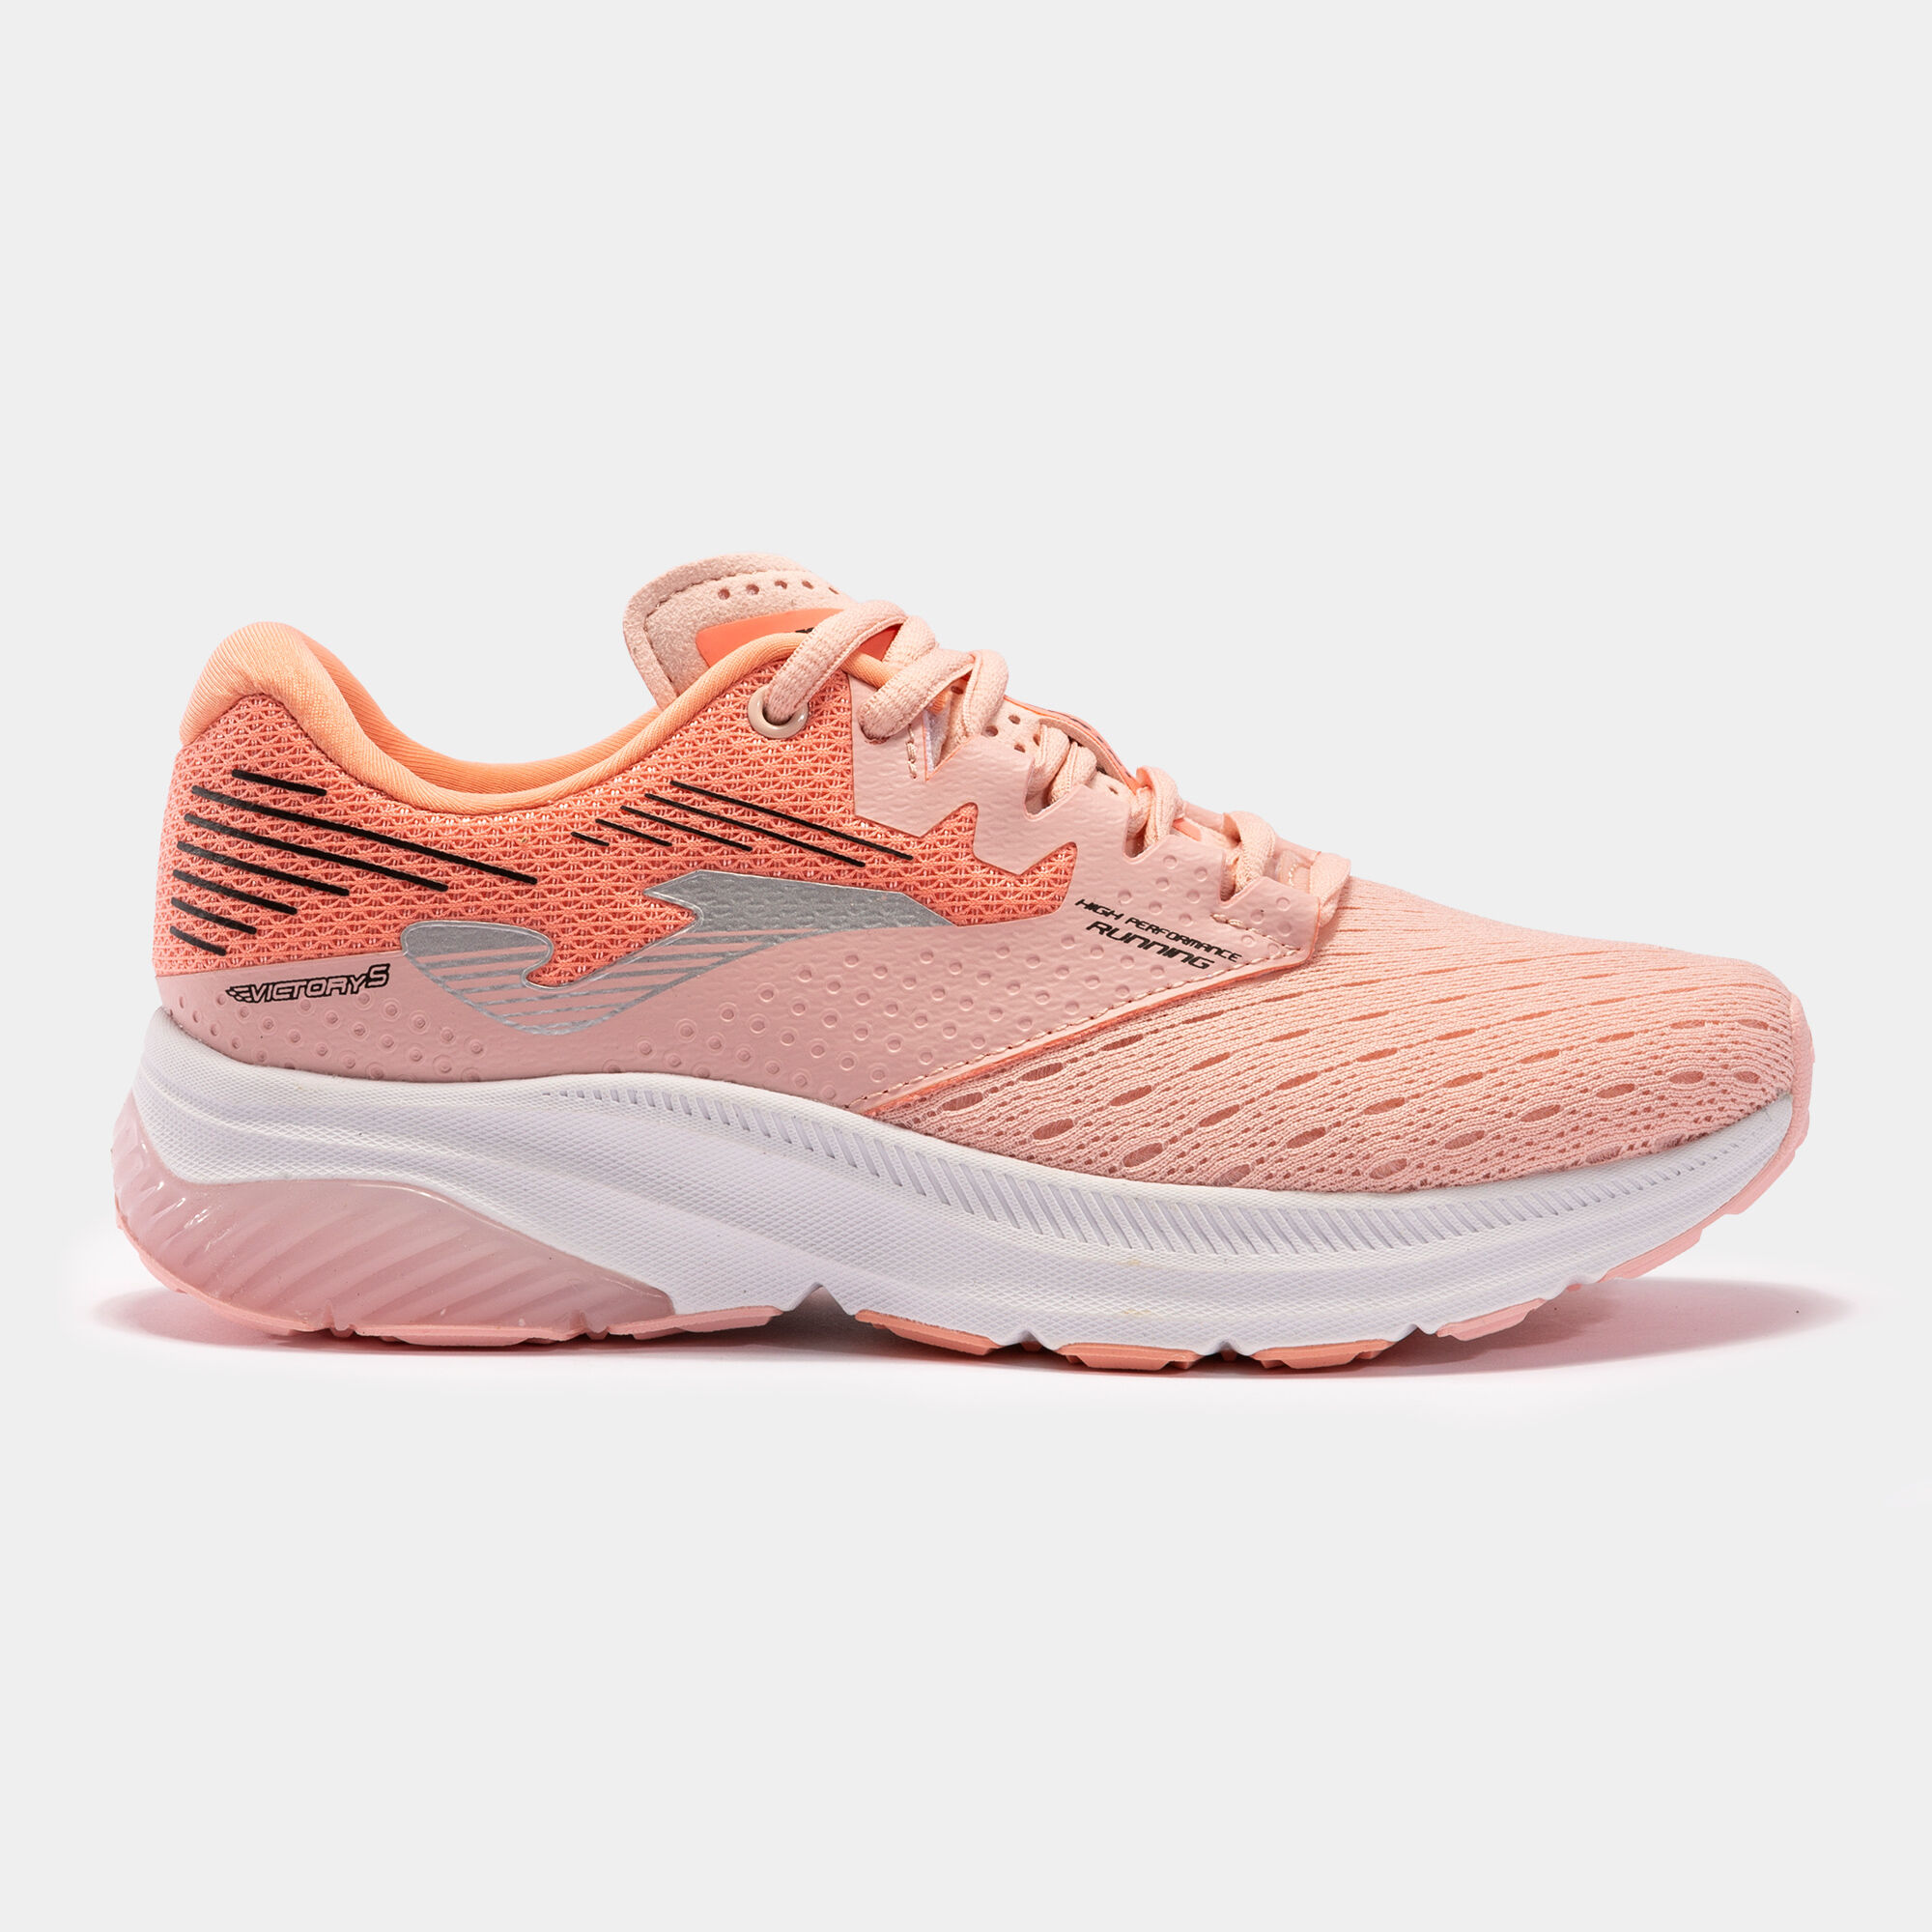 CHAUSSURES RUNNING VICTORY 22 FEMME ROSE